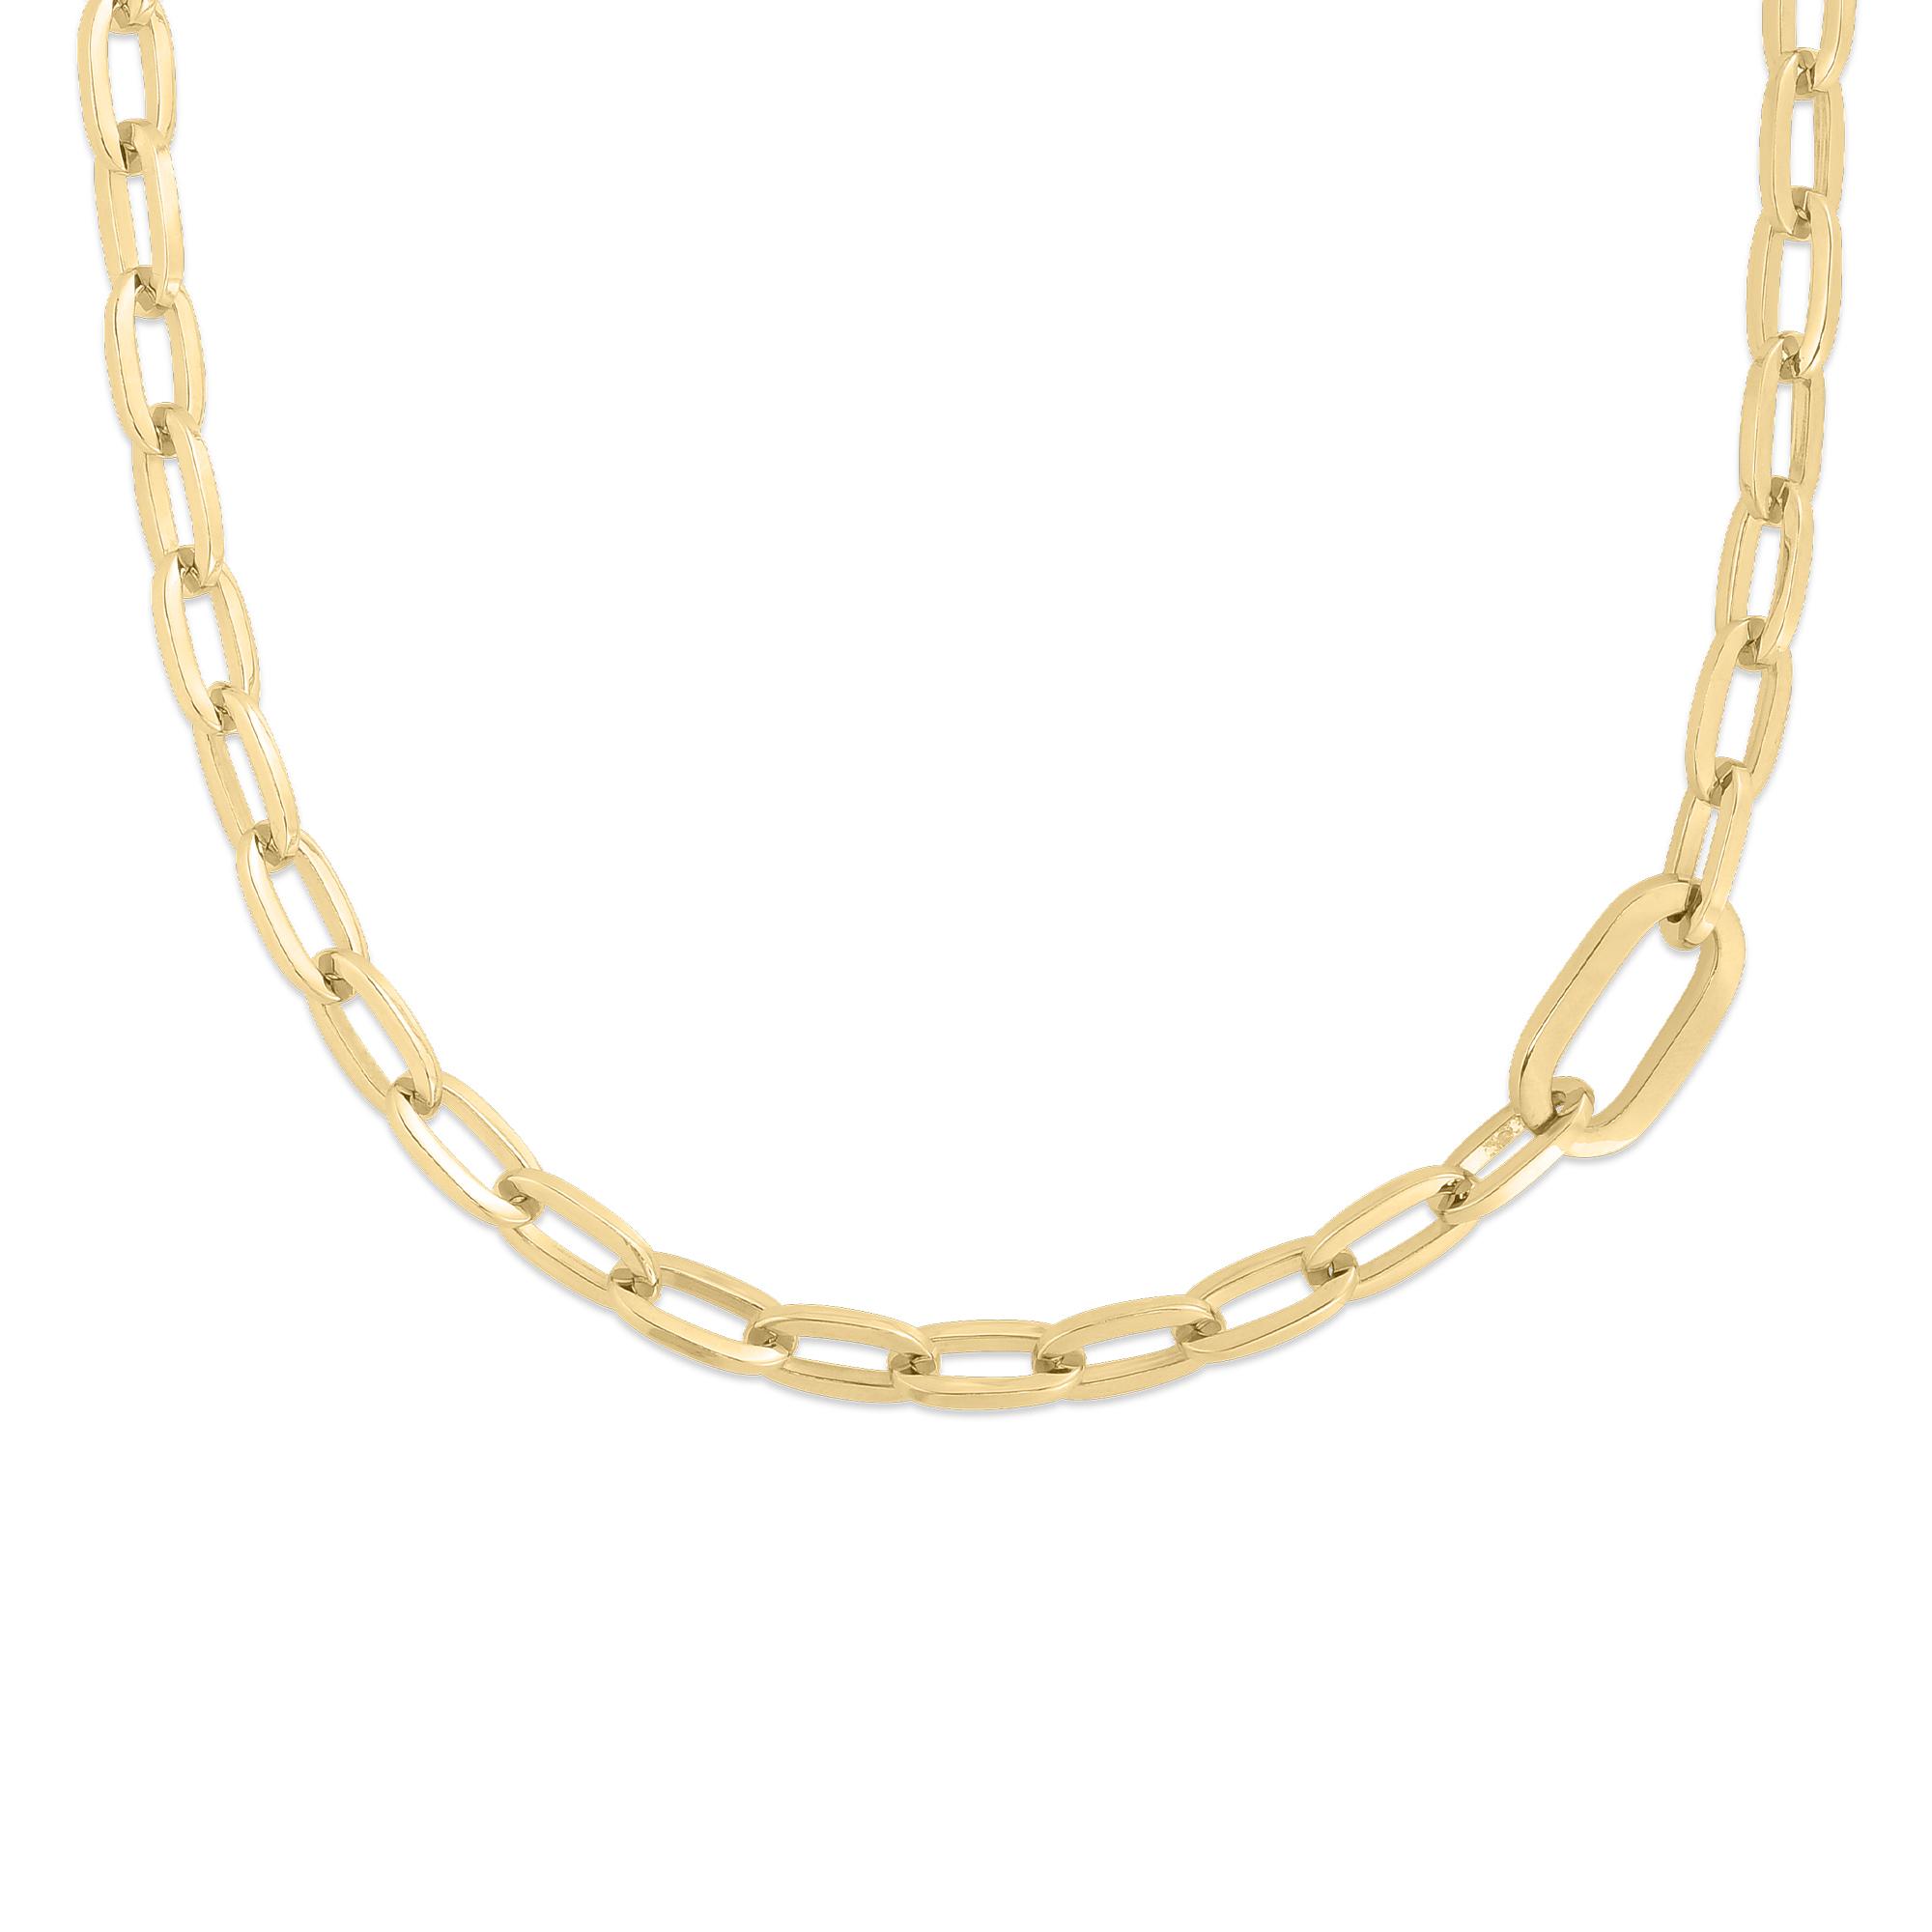 Roberto Coin Designer Gold Paperclip Necklace with Large Center Link